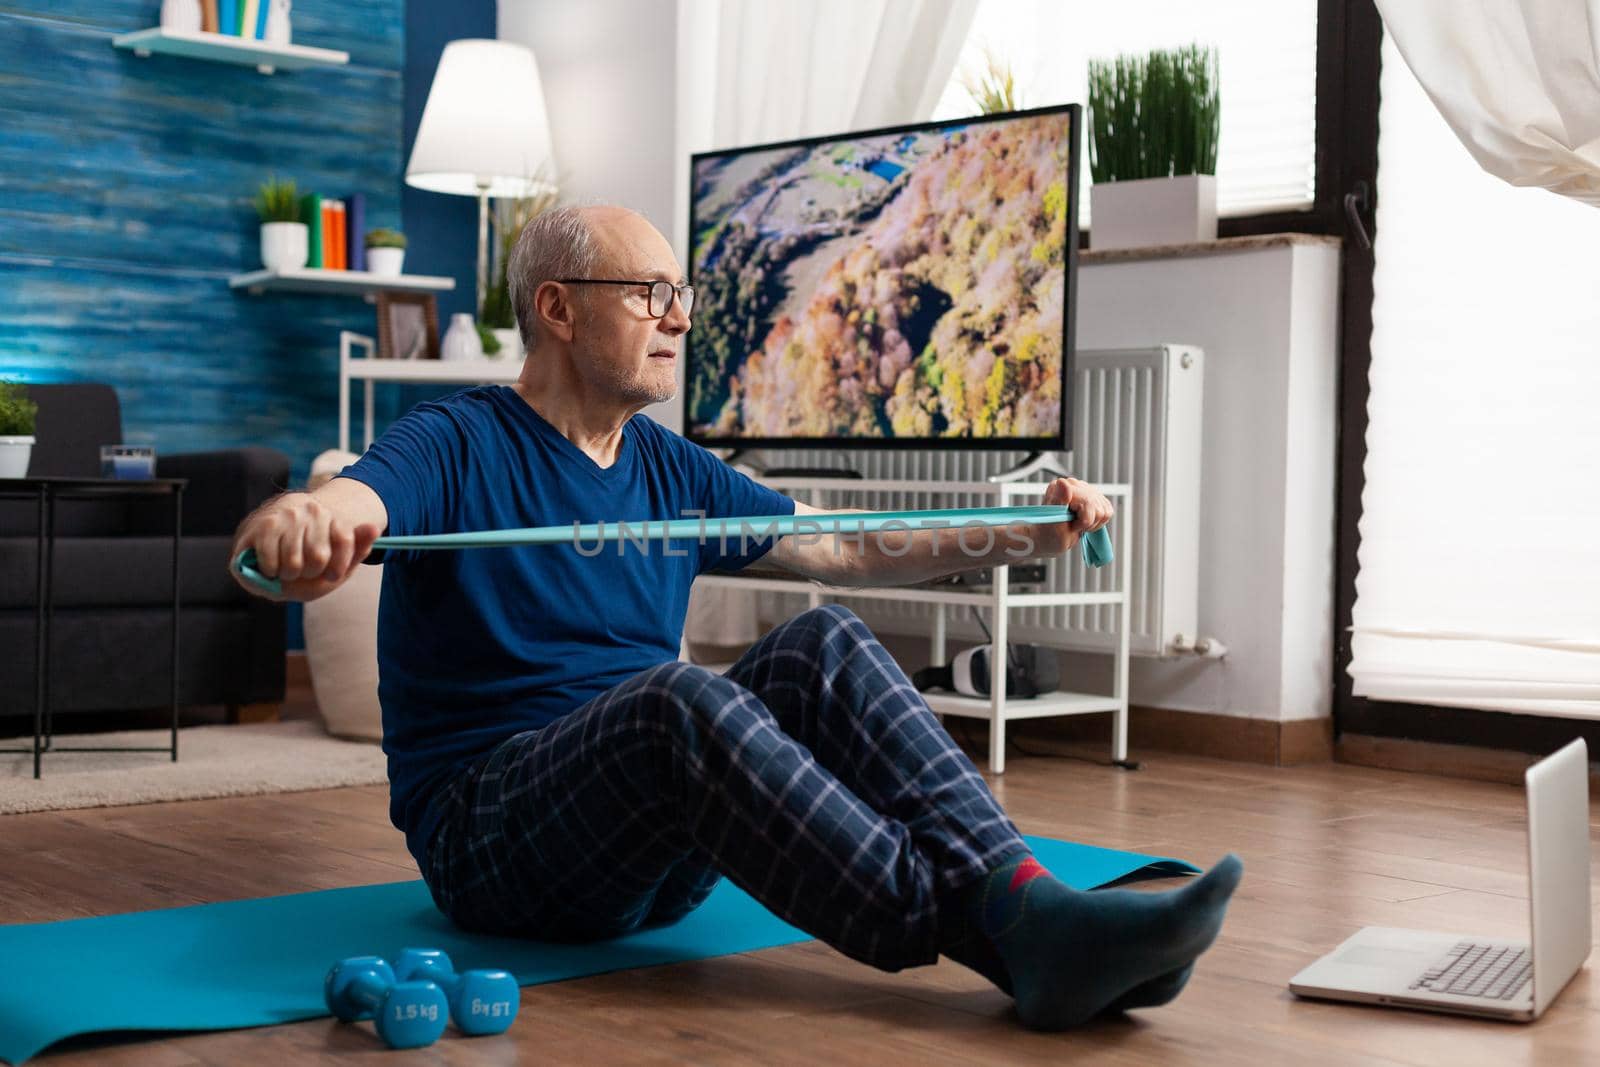 Retirement senior man sitting on yoga mat with leg in crossed position stretching arms muscles by DCStudio